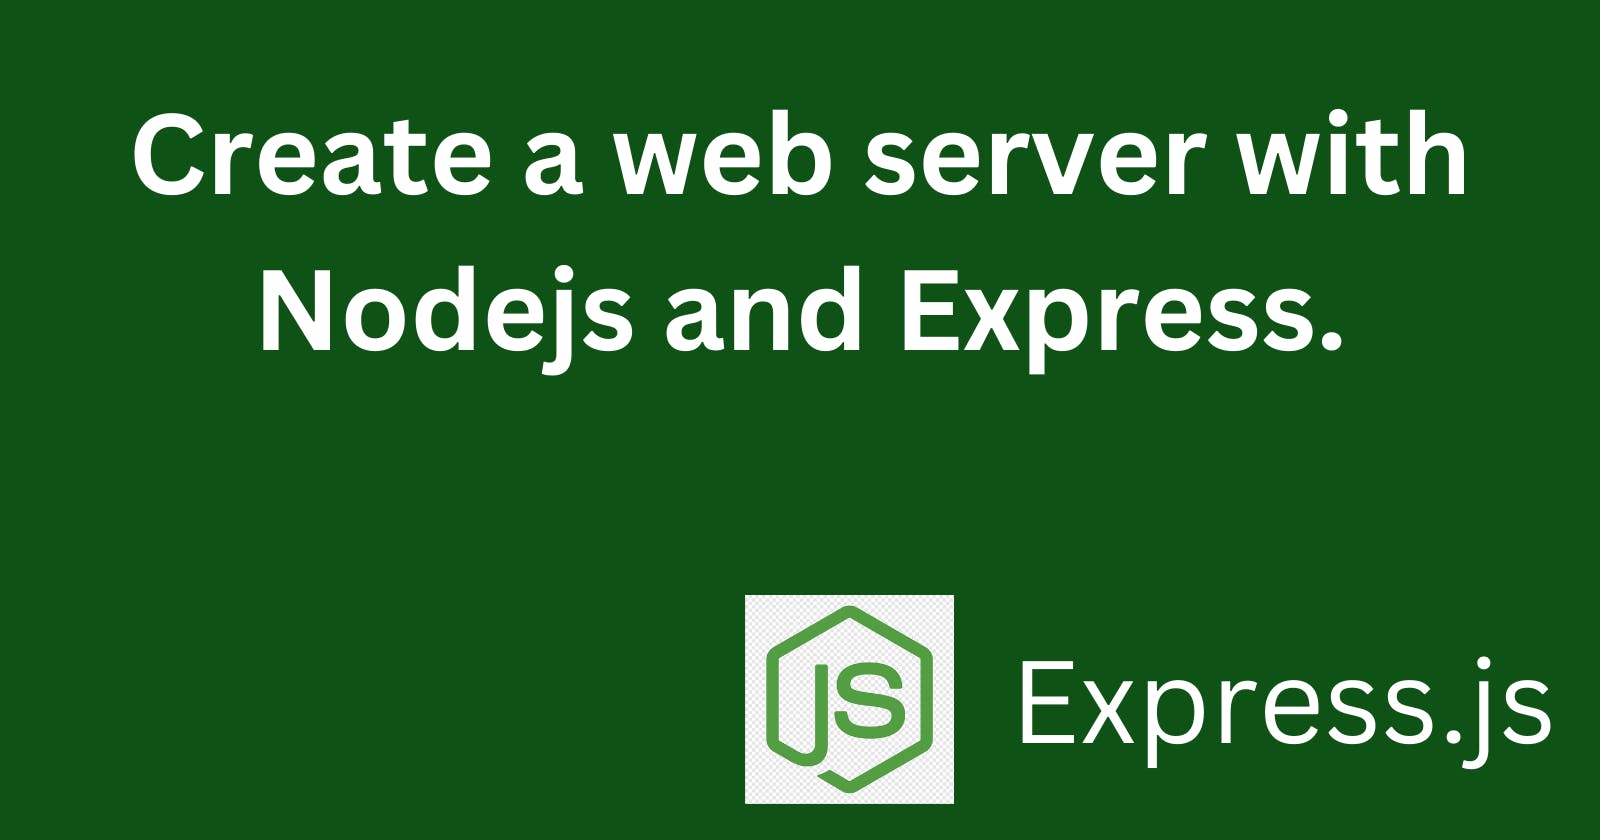 Create a web server with Nodejs and Express